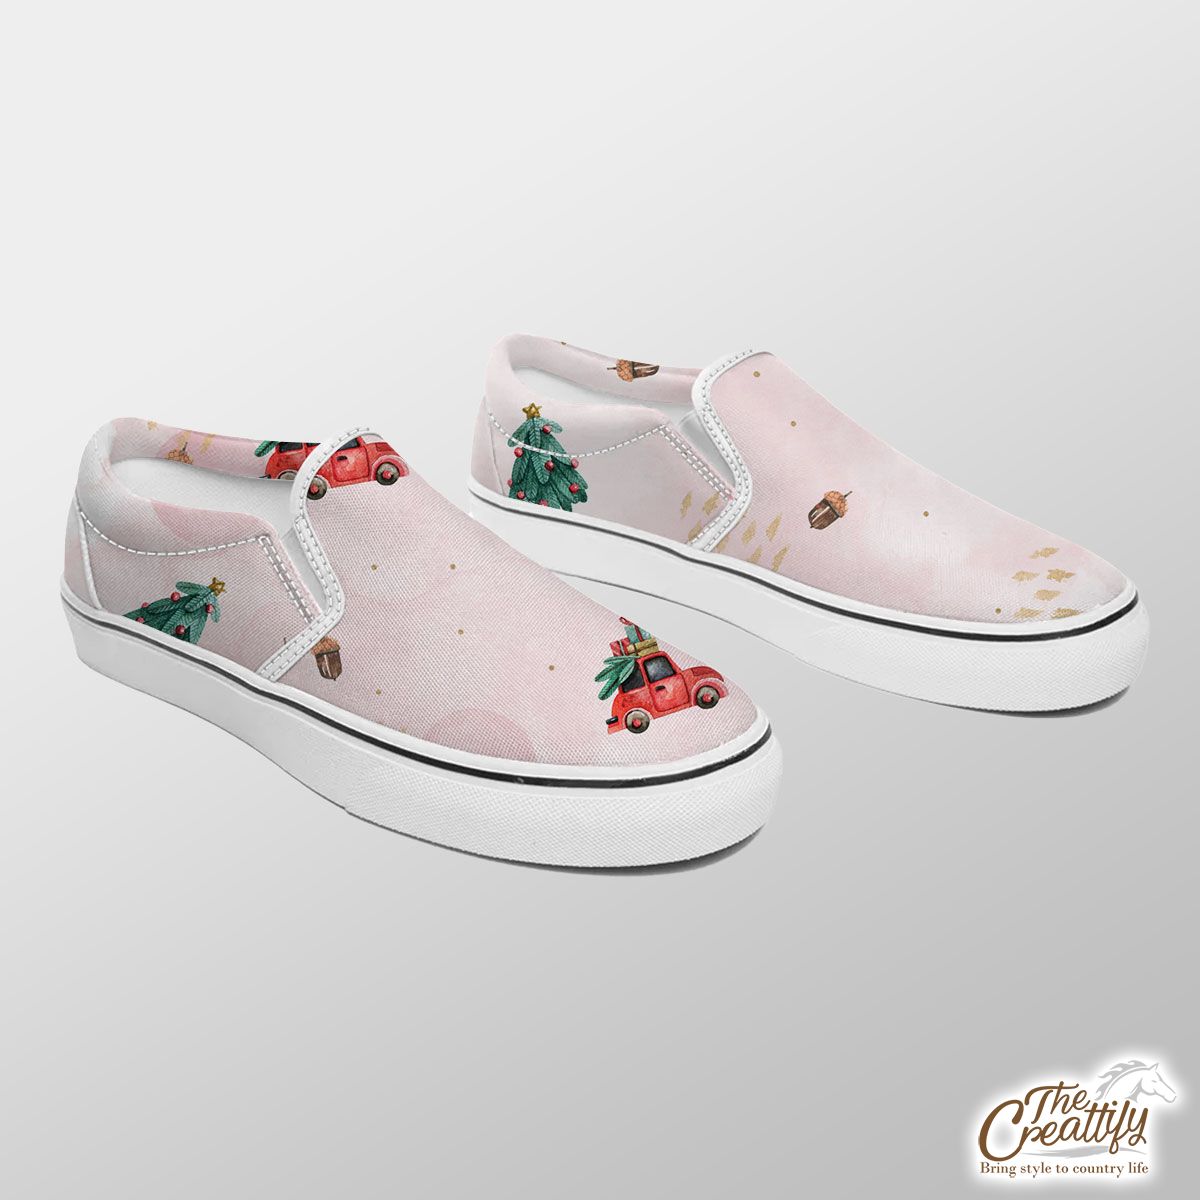 Watercolor Christmas Car With Gifts And Acorns Pink Pattern Slip On Sneakers